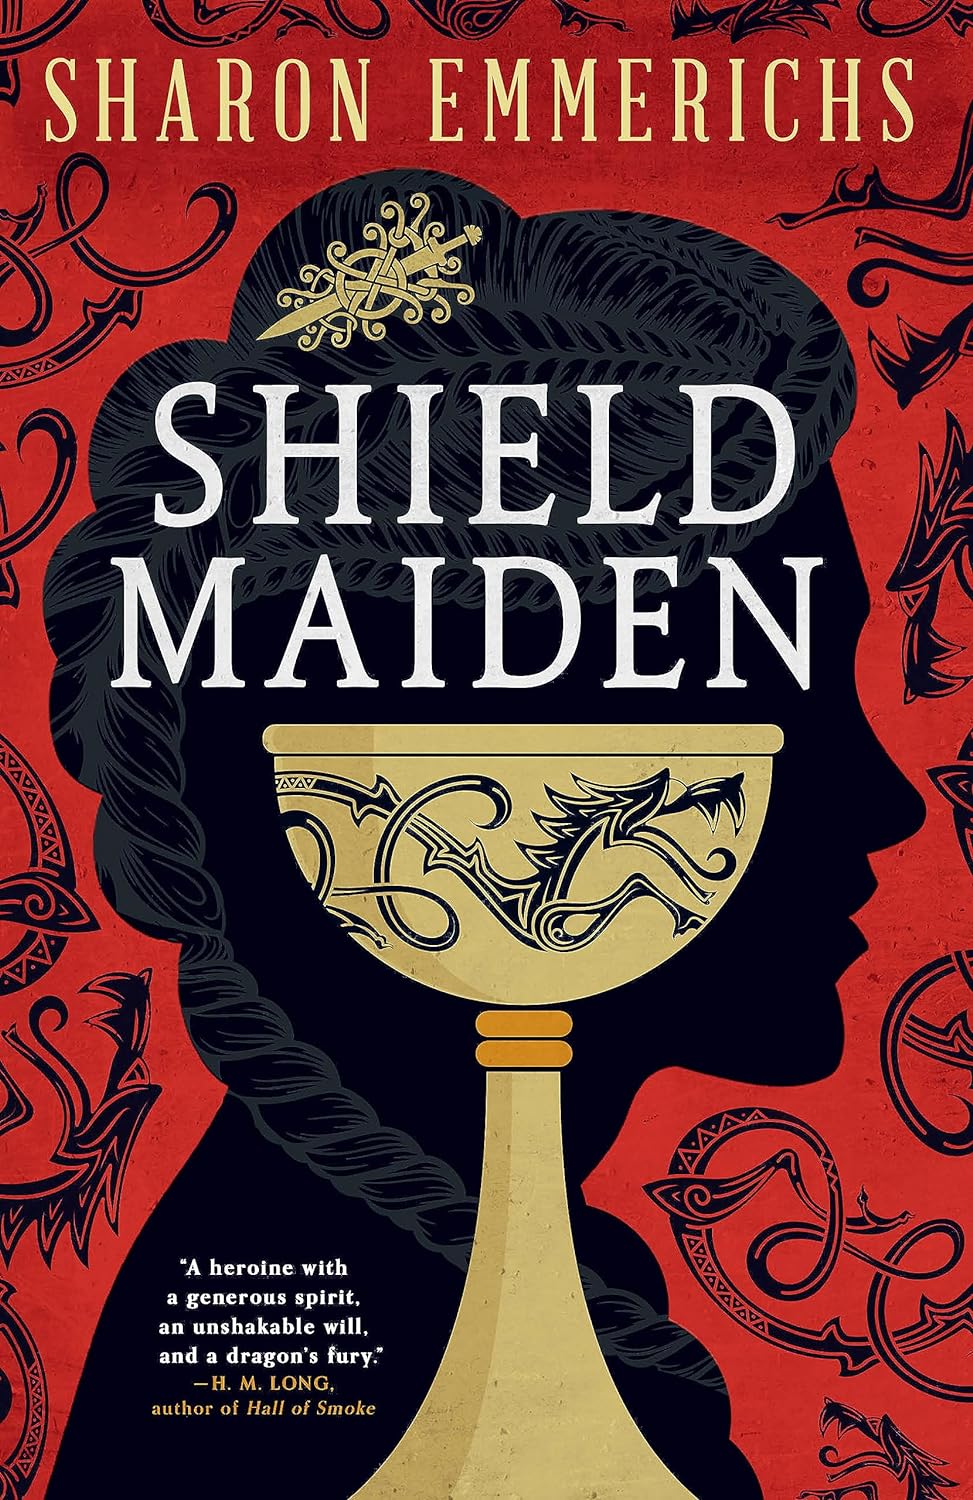 Are shield maidens real or fake?